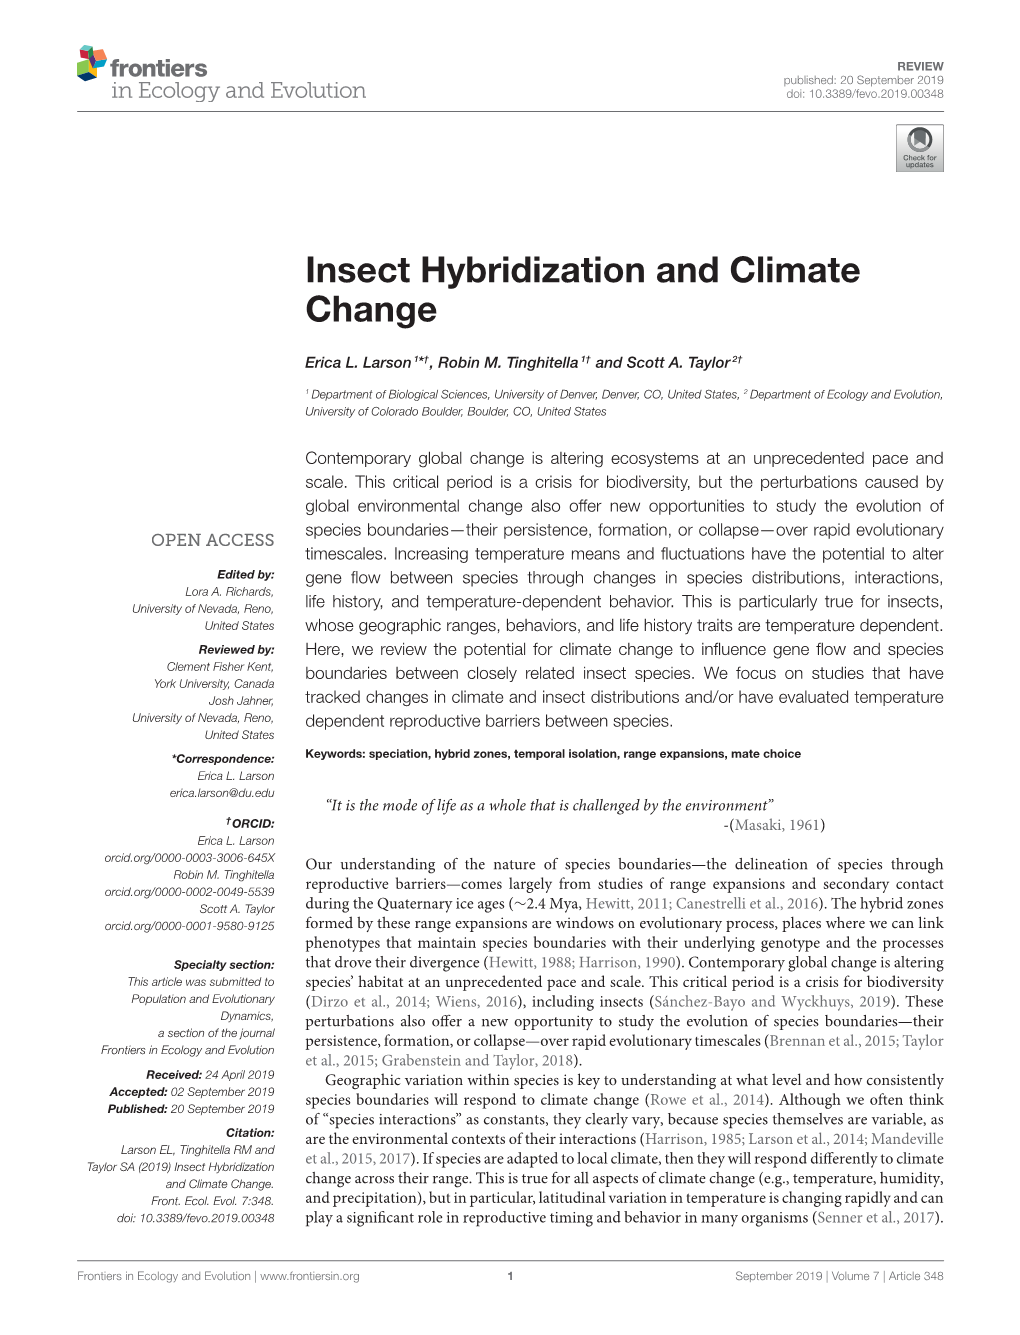 Insect Hybridization and Climate Change